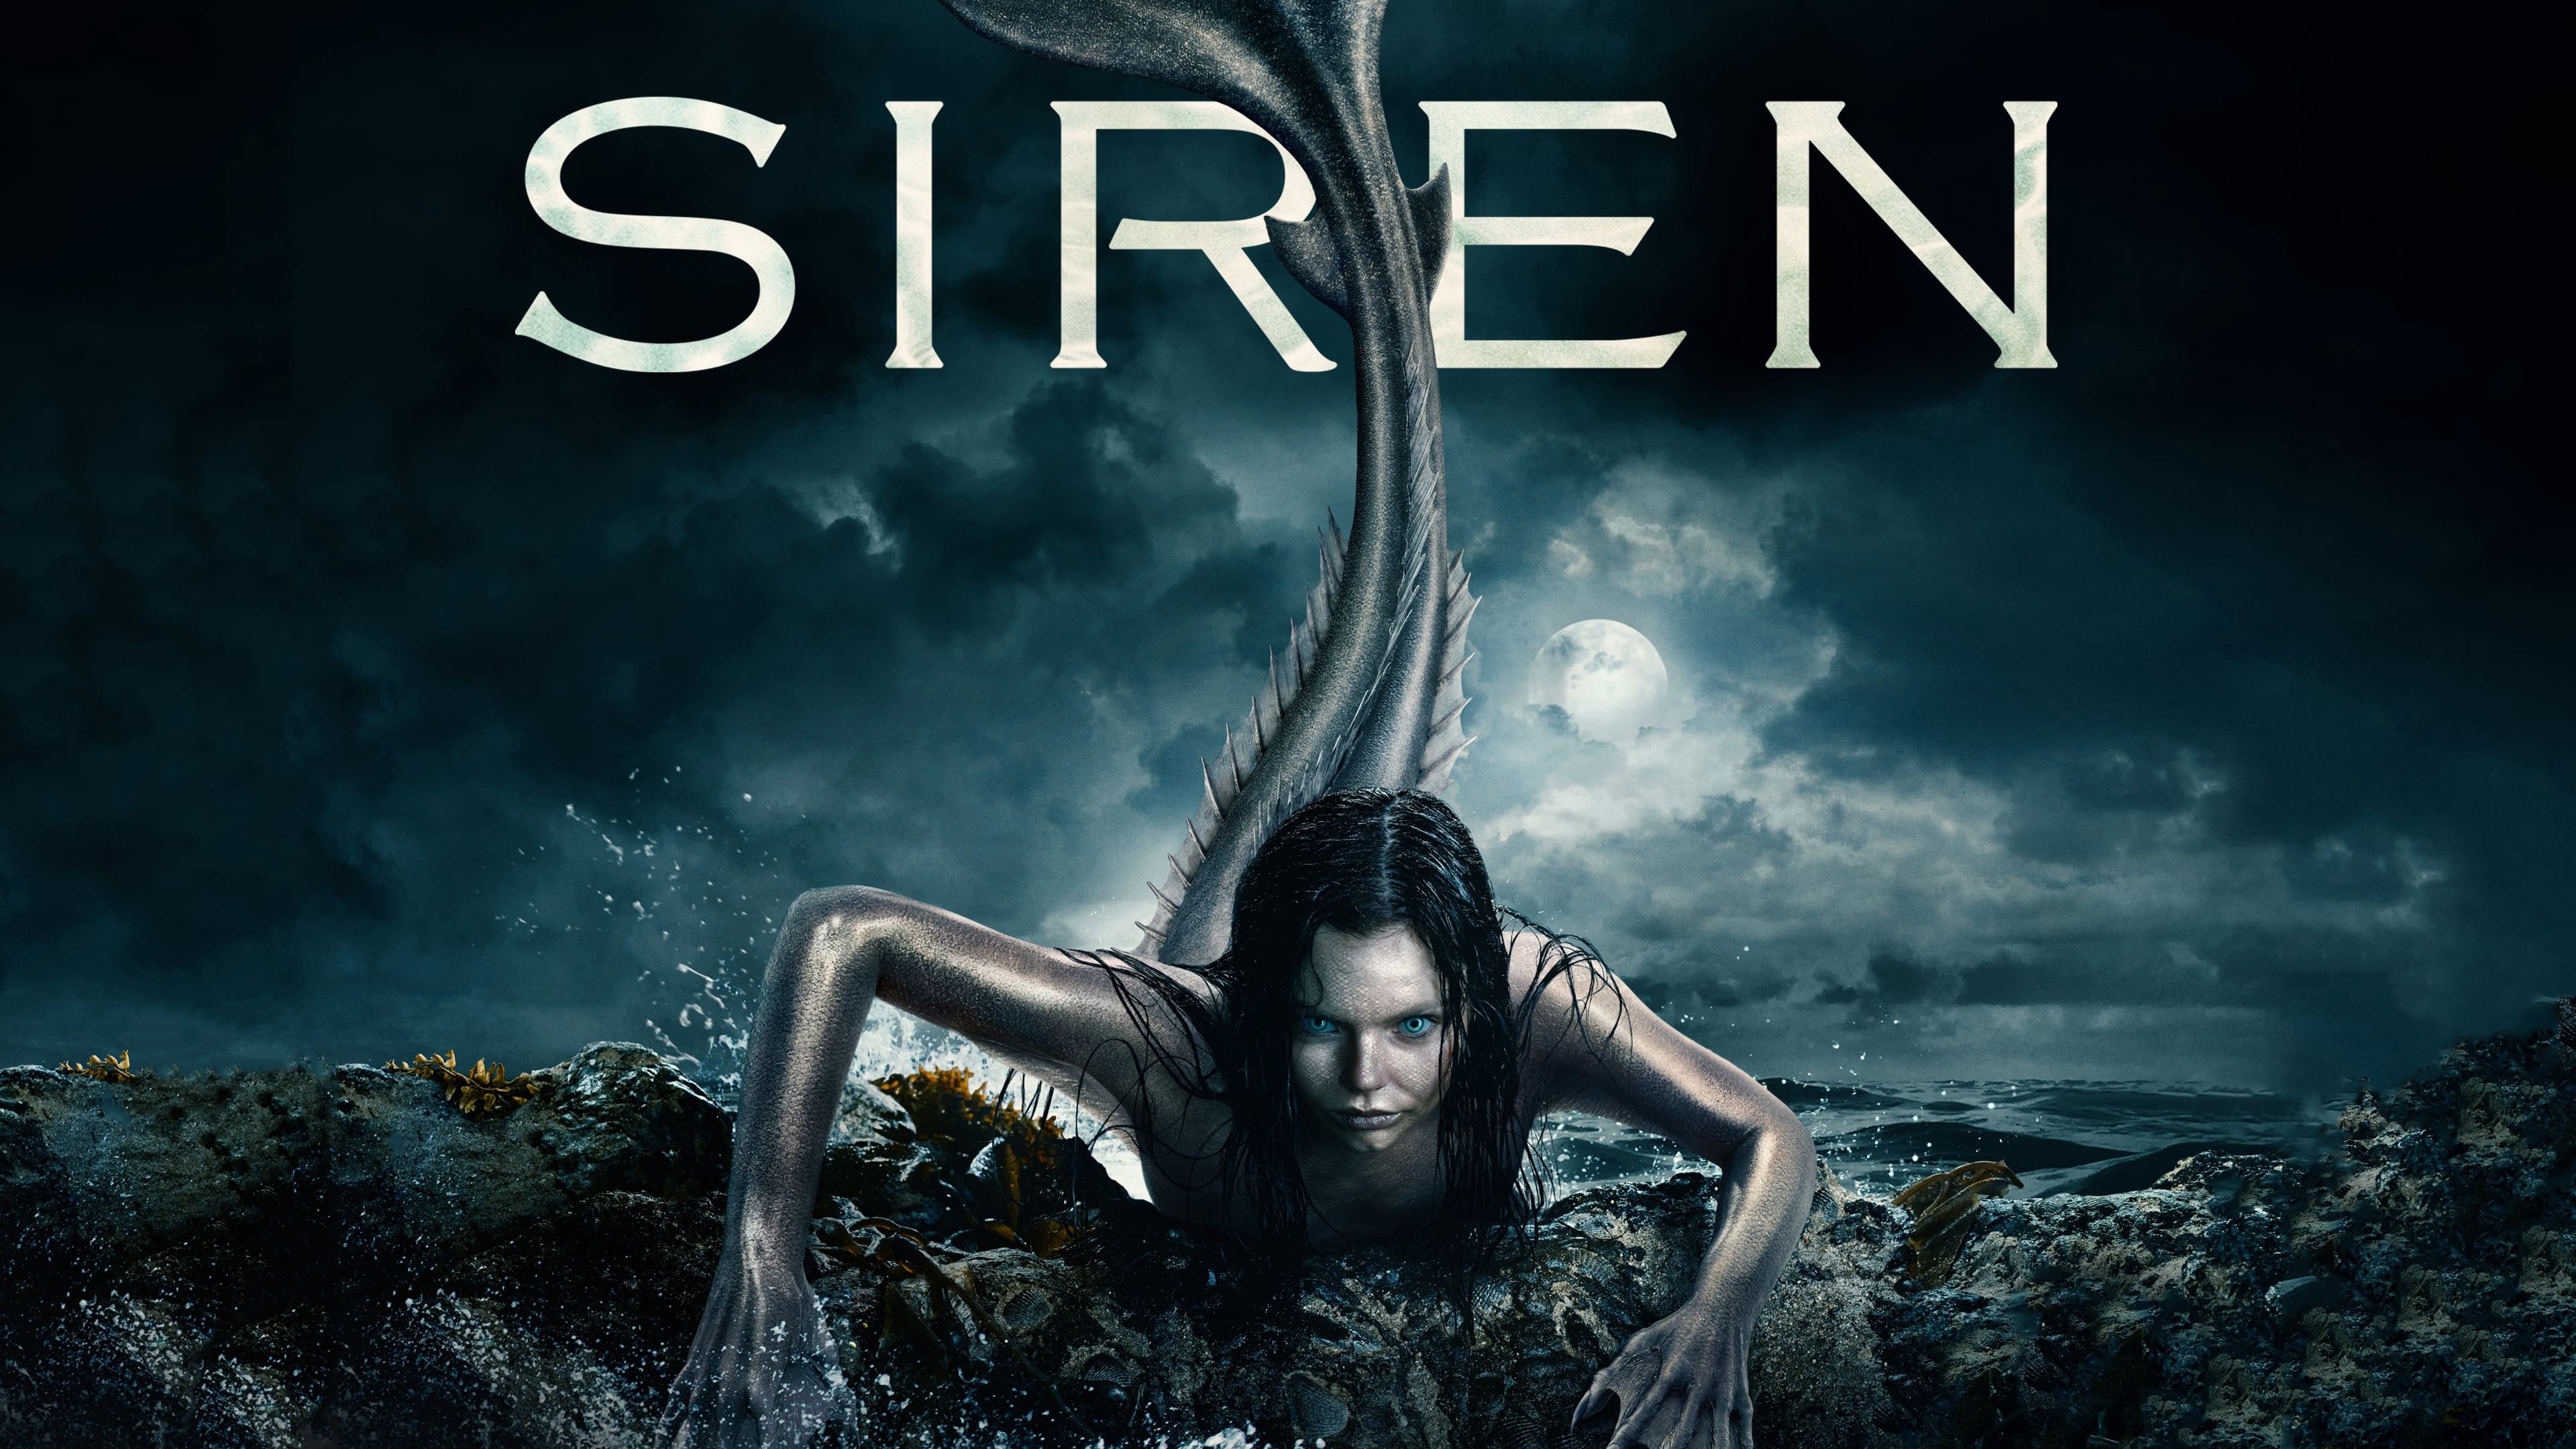 Siren Tv Series HD Tv Shows, 4k Wallpaper, Image, Background, Photo and Picture